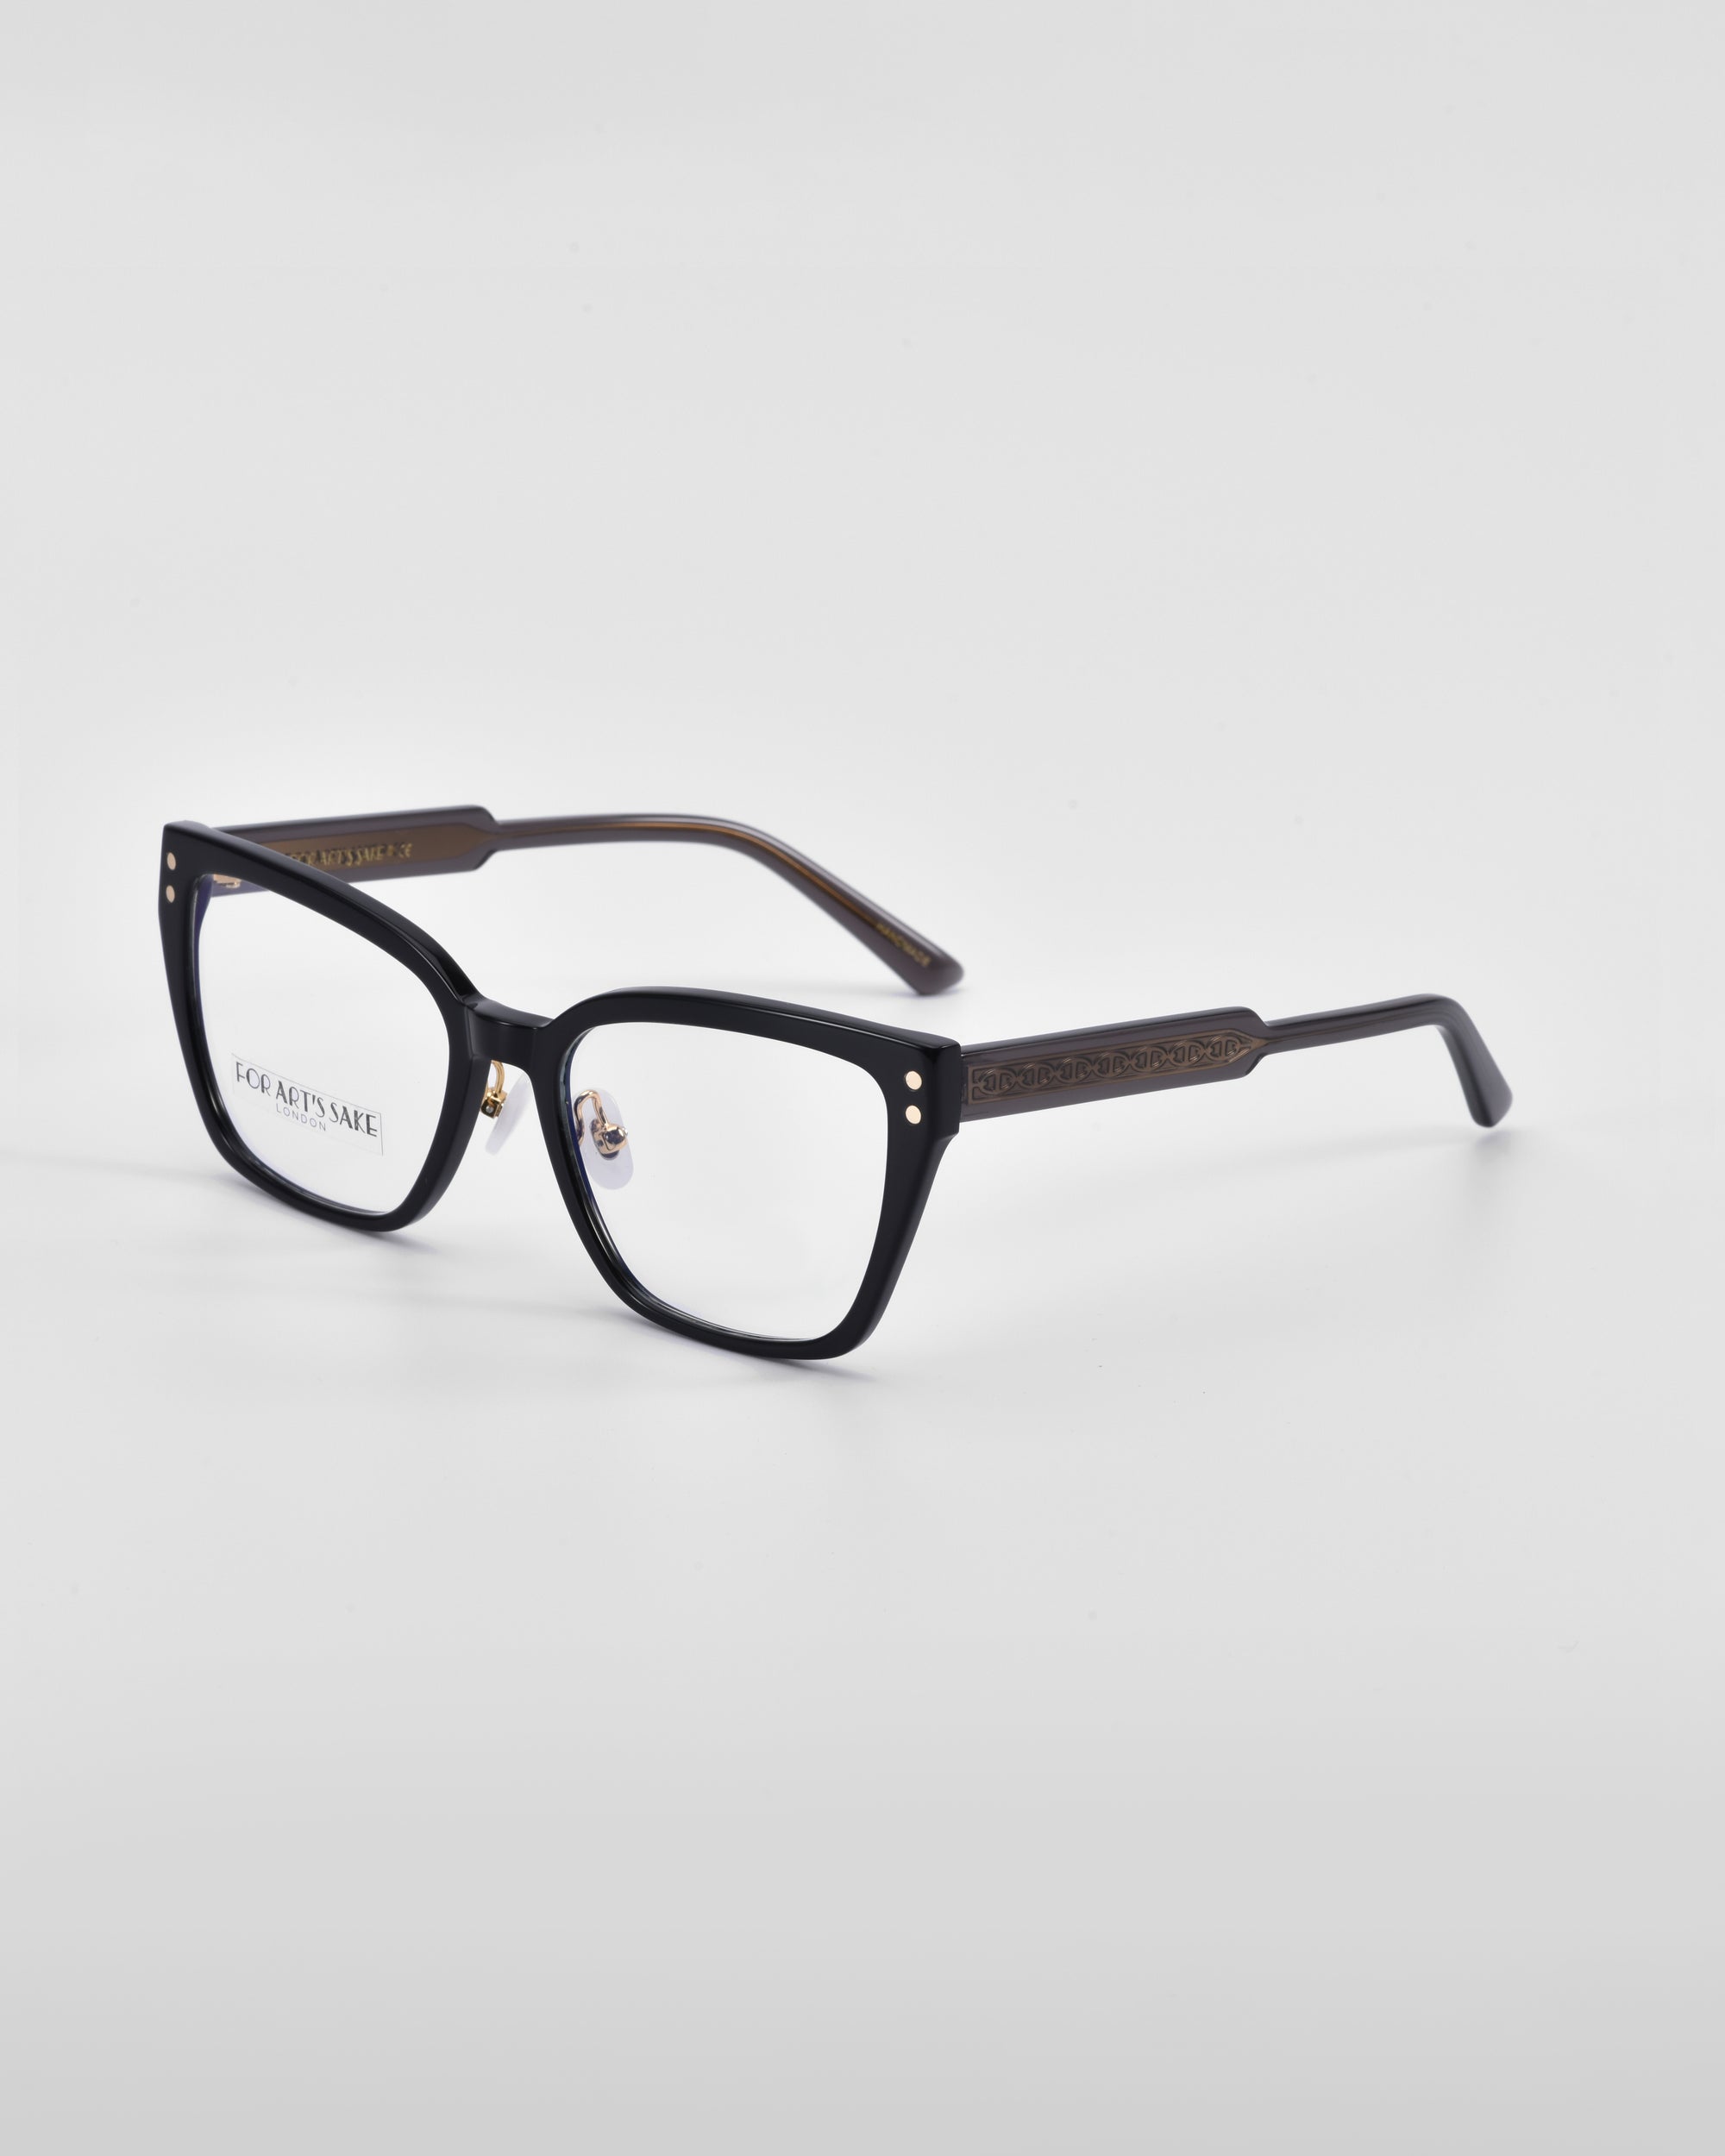 A pair of black rectangular eyeglasses with subtle link-chain pattern detailing on the temples. The glasses have clear lenses and a simple, modern design suitable for both casual and formal wear. The background is a plain, light grey. These are the Abbey eyeglasses by For Art's Sake®.